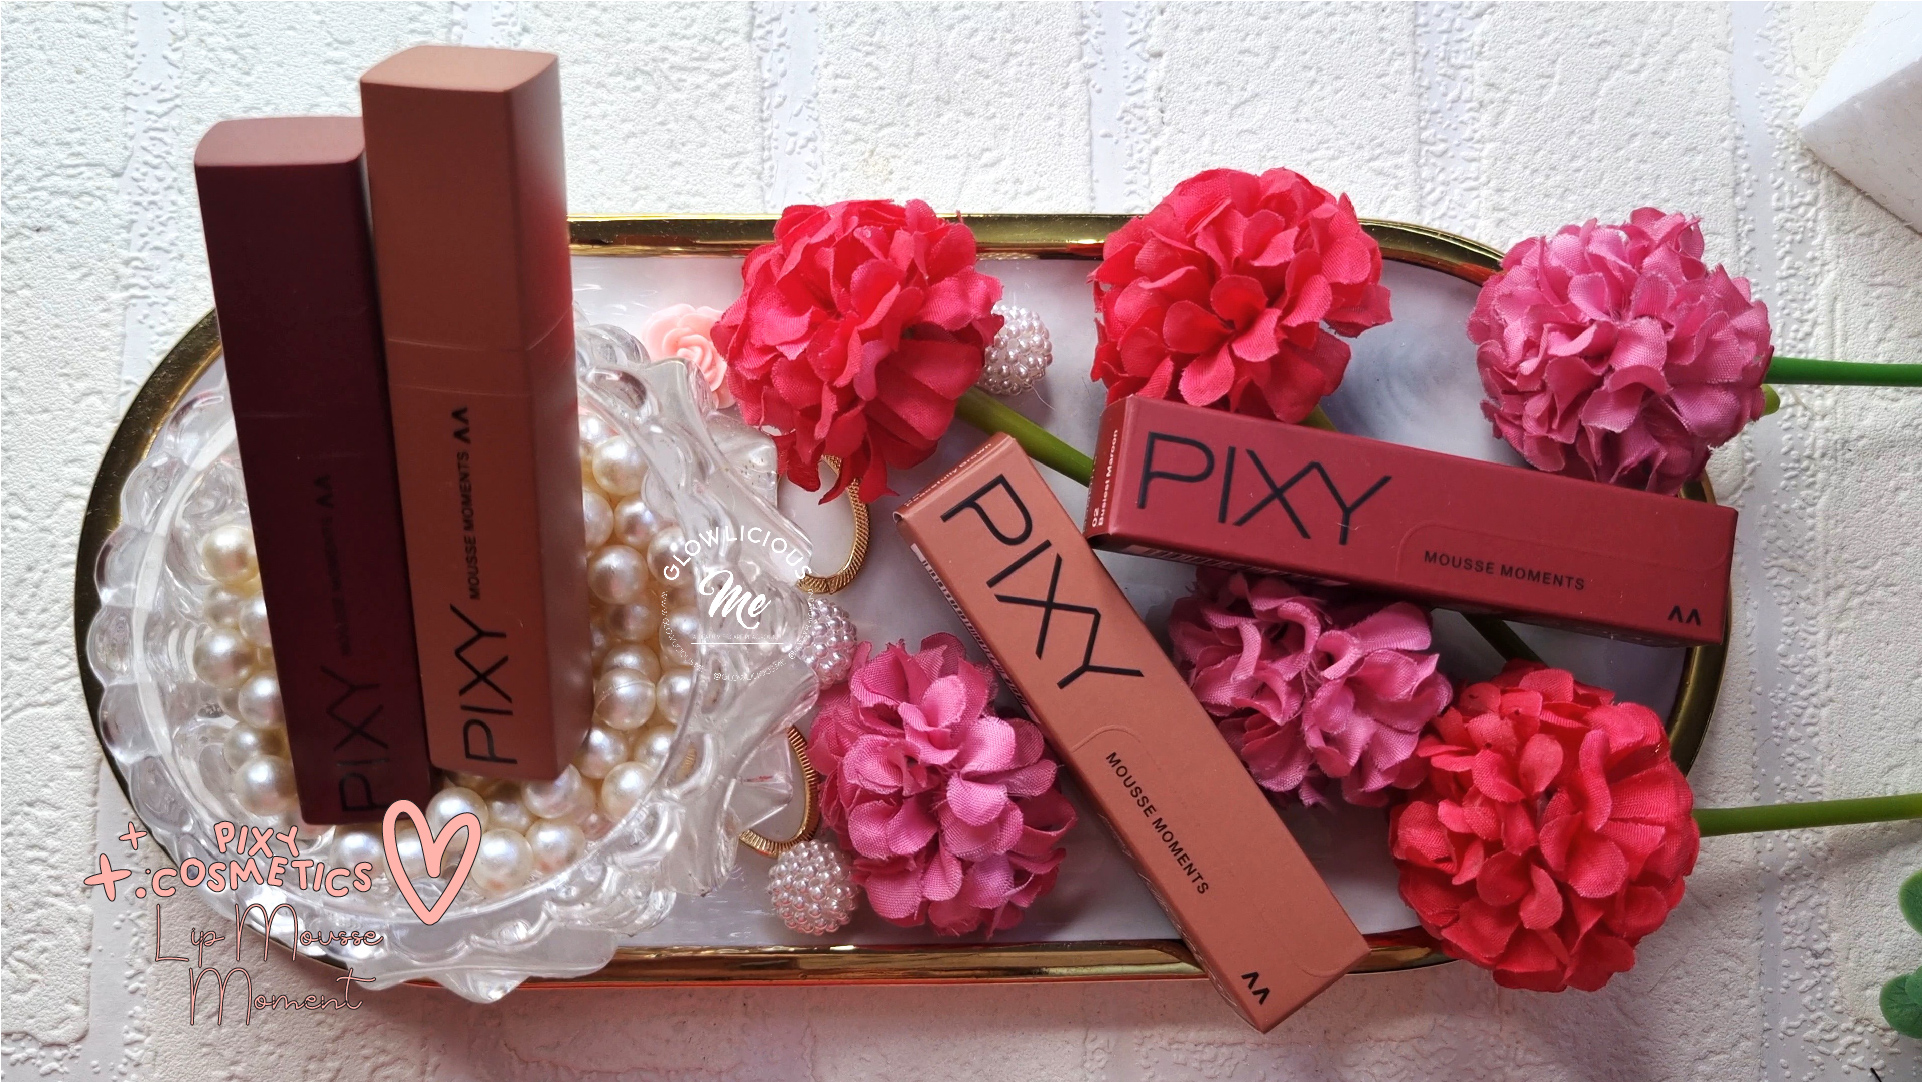 Pixy Lip Mousse Moment Swatches Review - di bibir gelap - GlowliciousmeSwatches-10